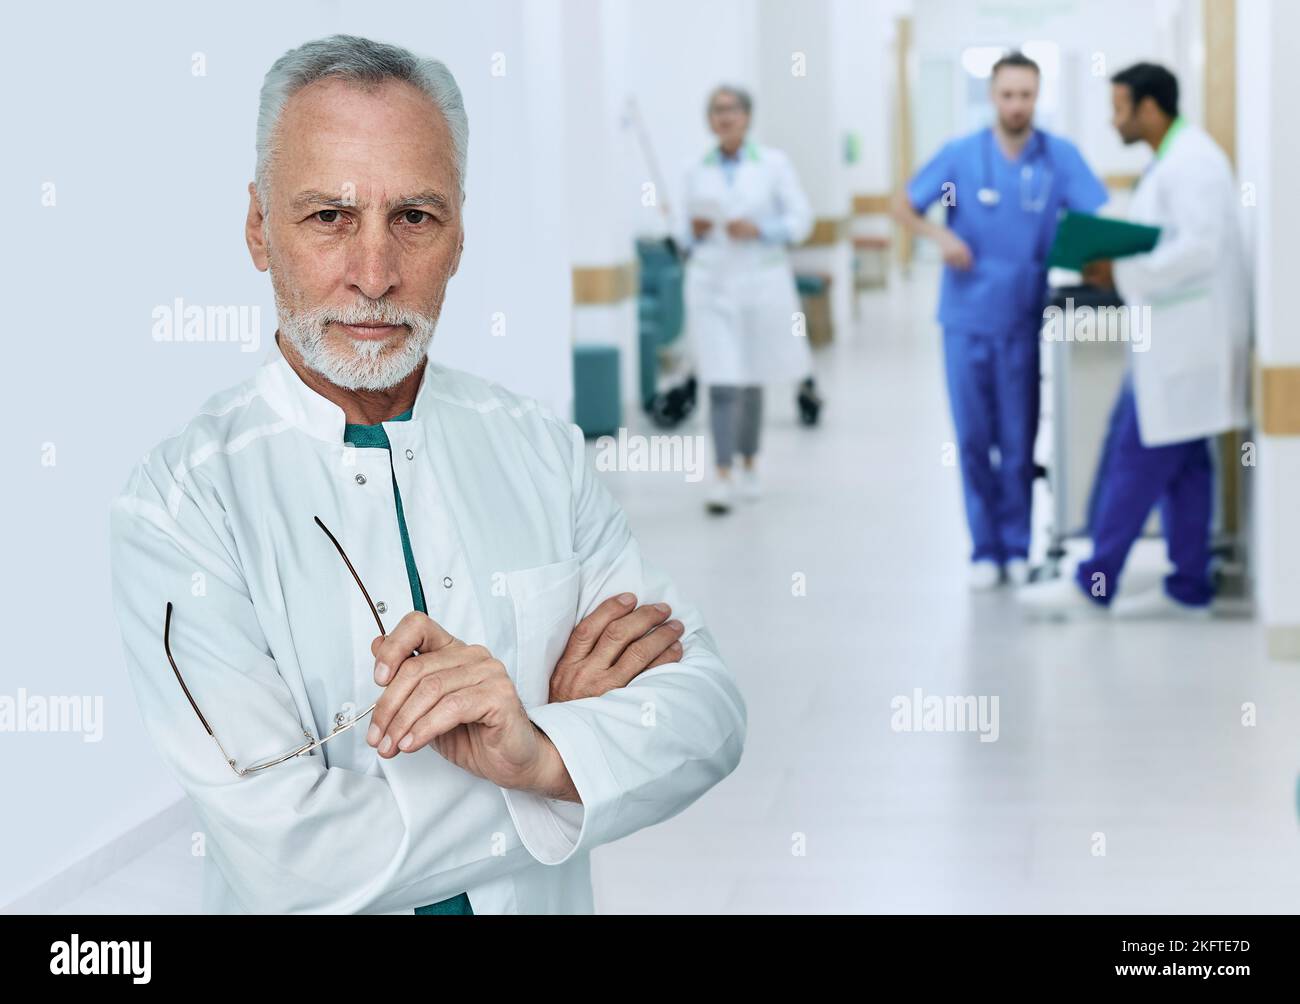 Experienced male general practitioner wearing medical uniform standing with arms crossed in modern medical clinic while working day, portrait Stock Photo